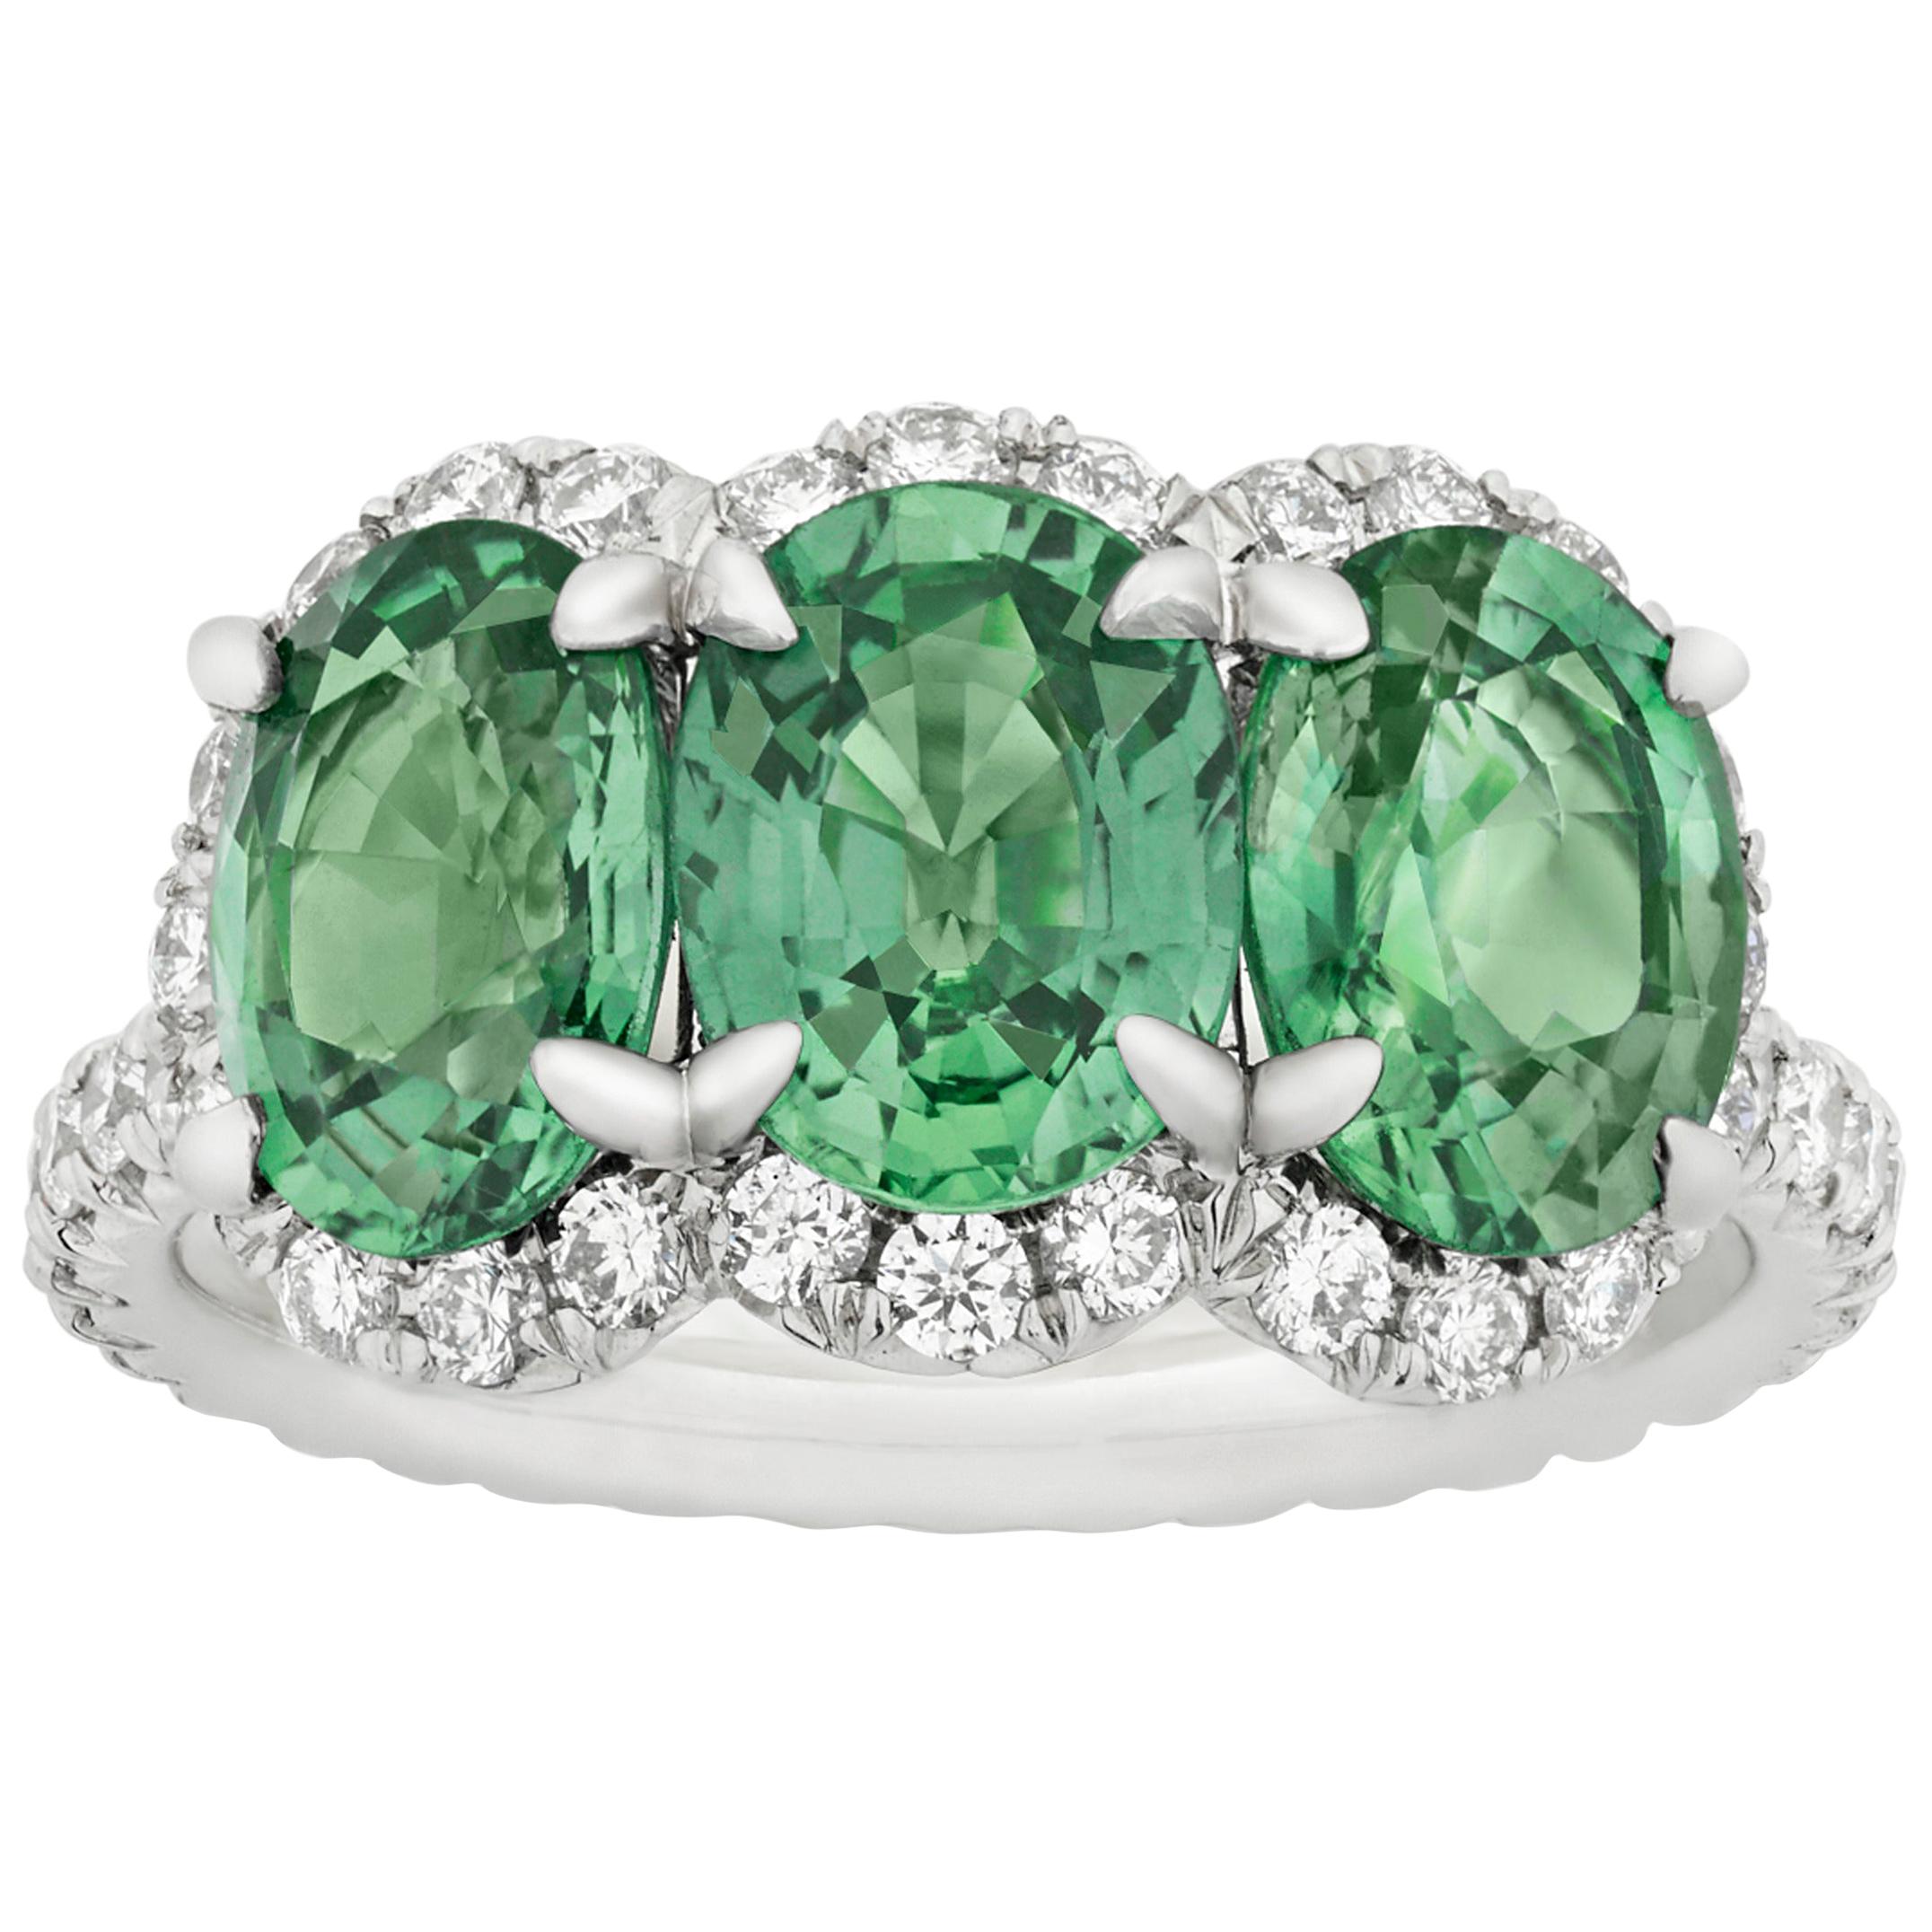 Untreated Green Sapphire Ring, 4.69 Carat